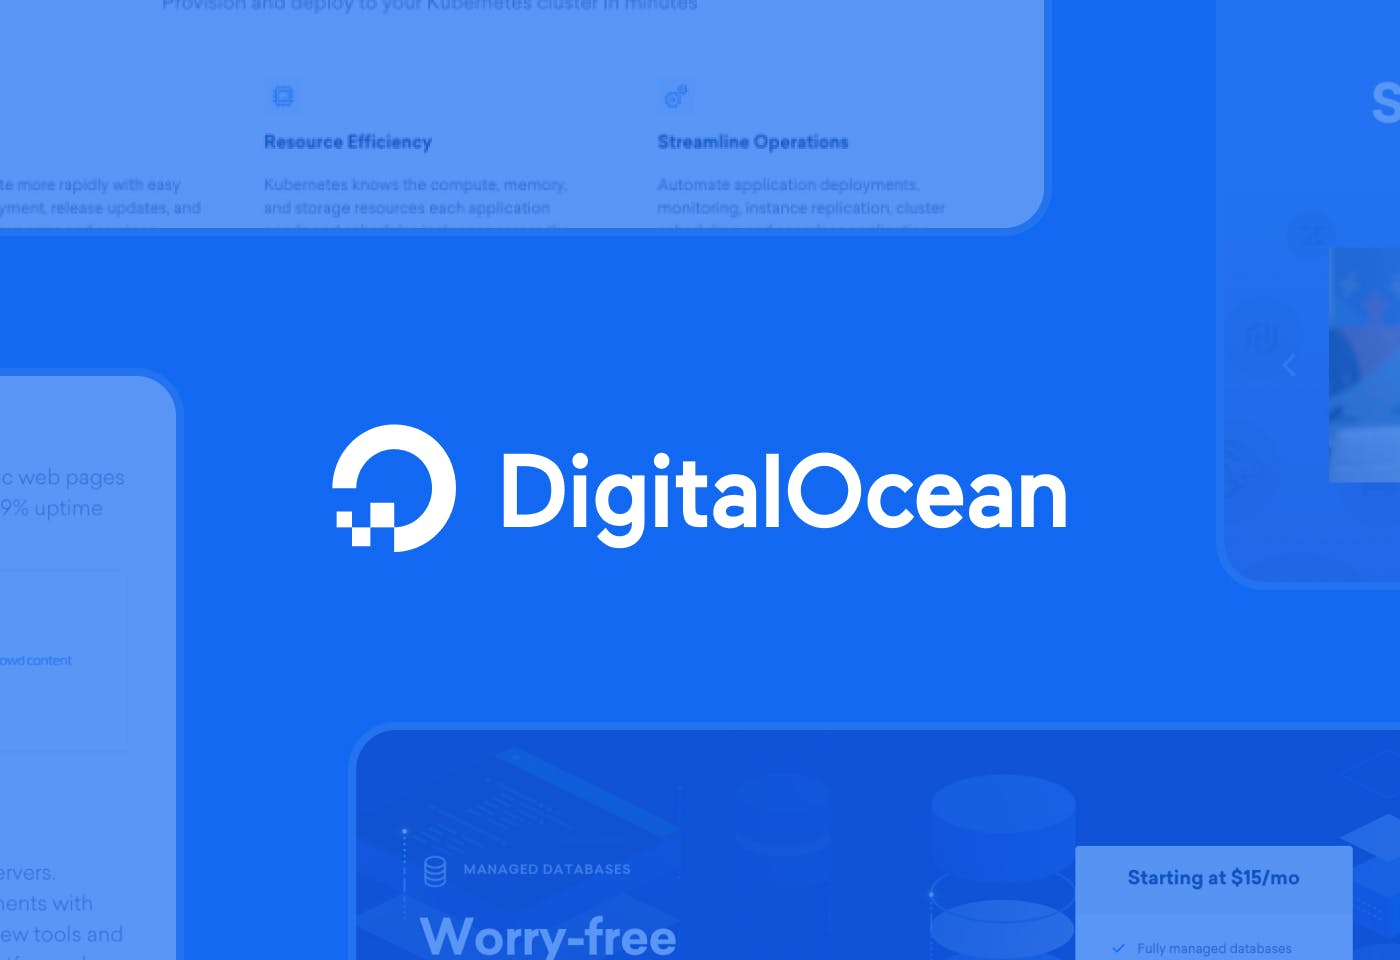 The Digital Ocean logo on a blue background with screenshots of the product faded out and cropped along the edges.